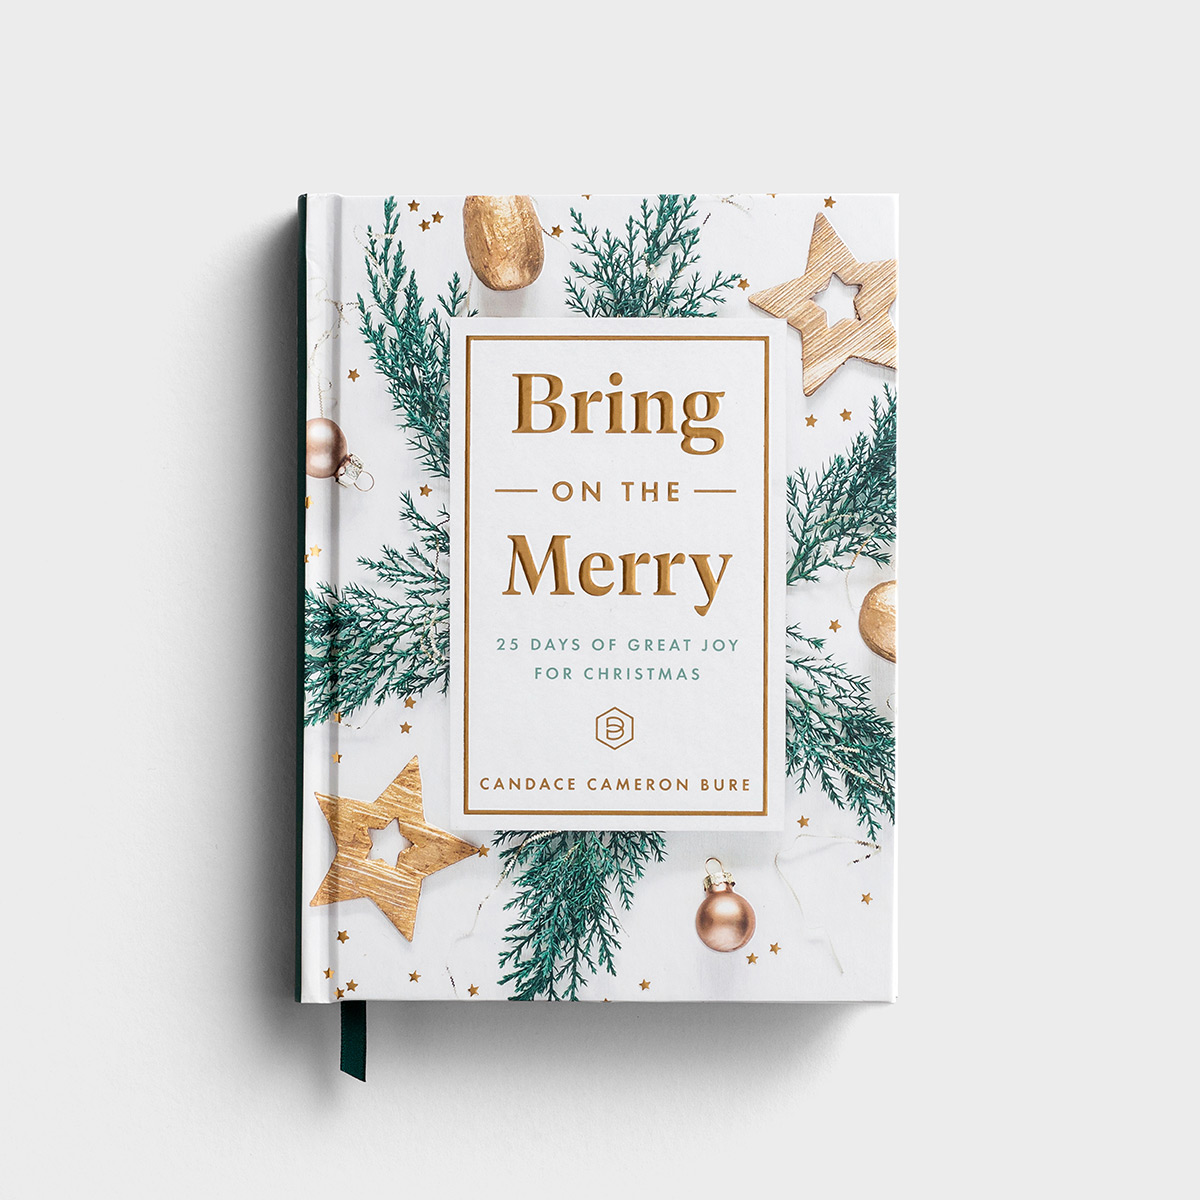 Candace Cameron Bure - Bring On The Merry: 25 Days of Great Joy for Christmas